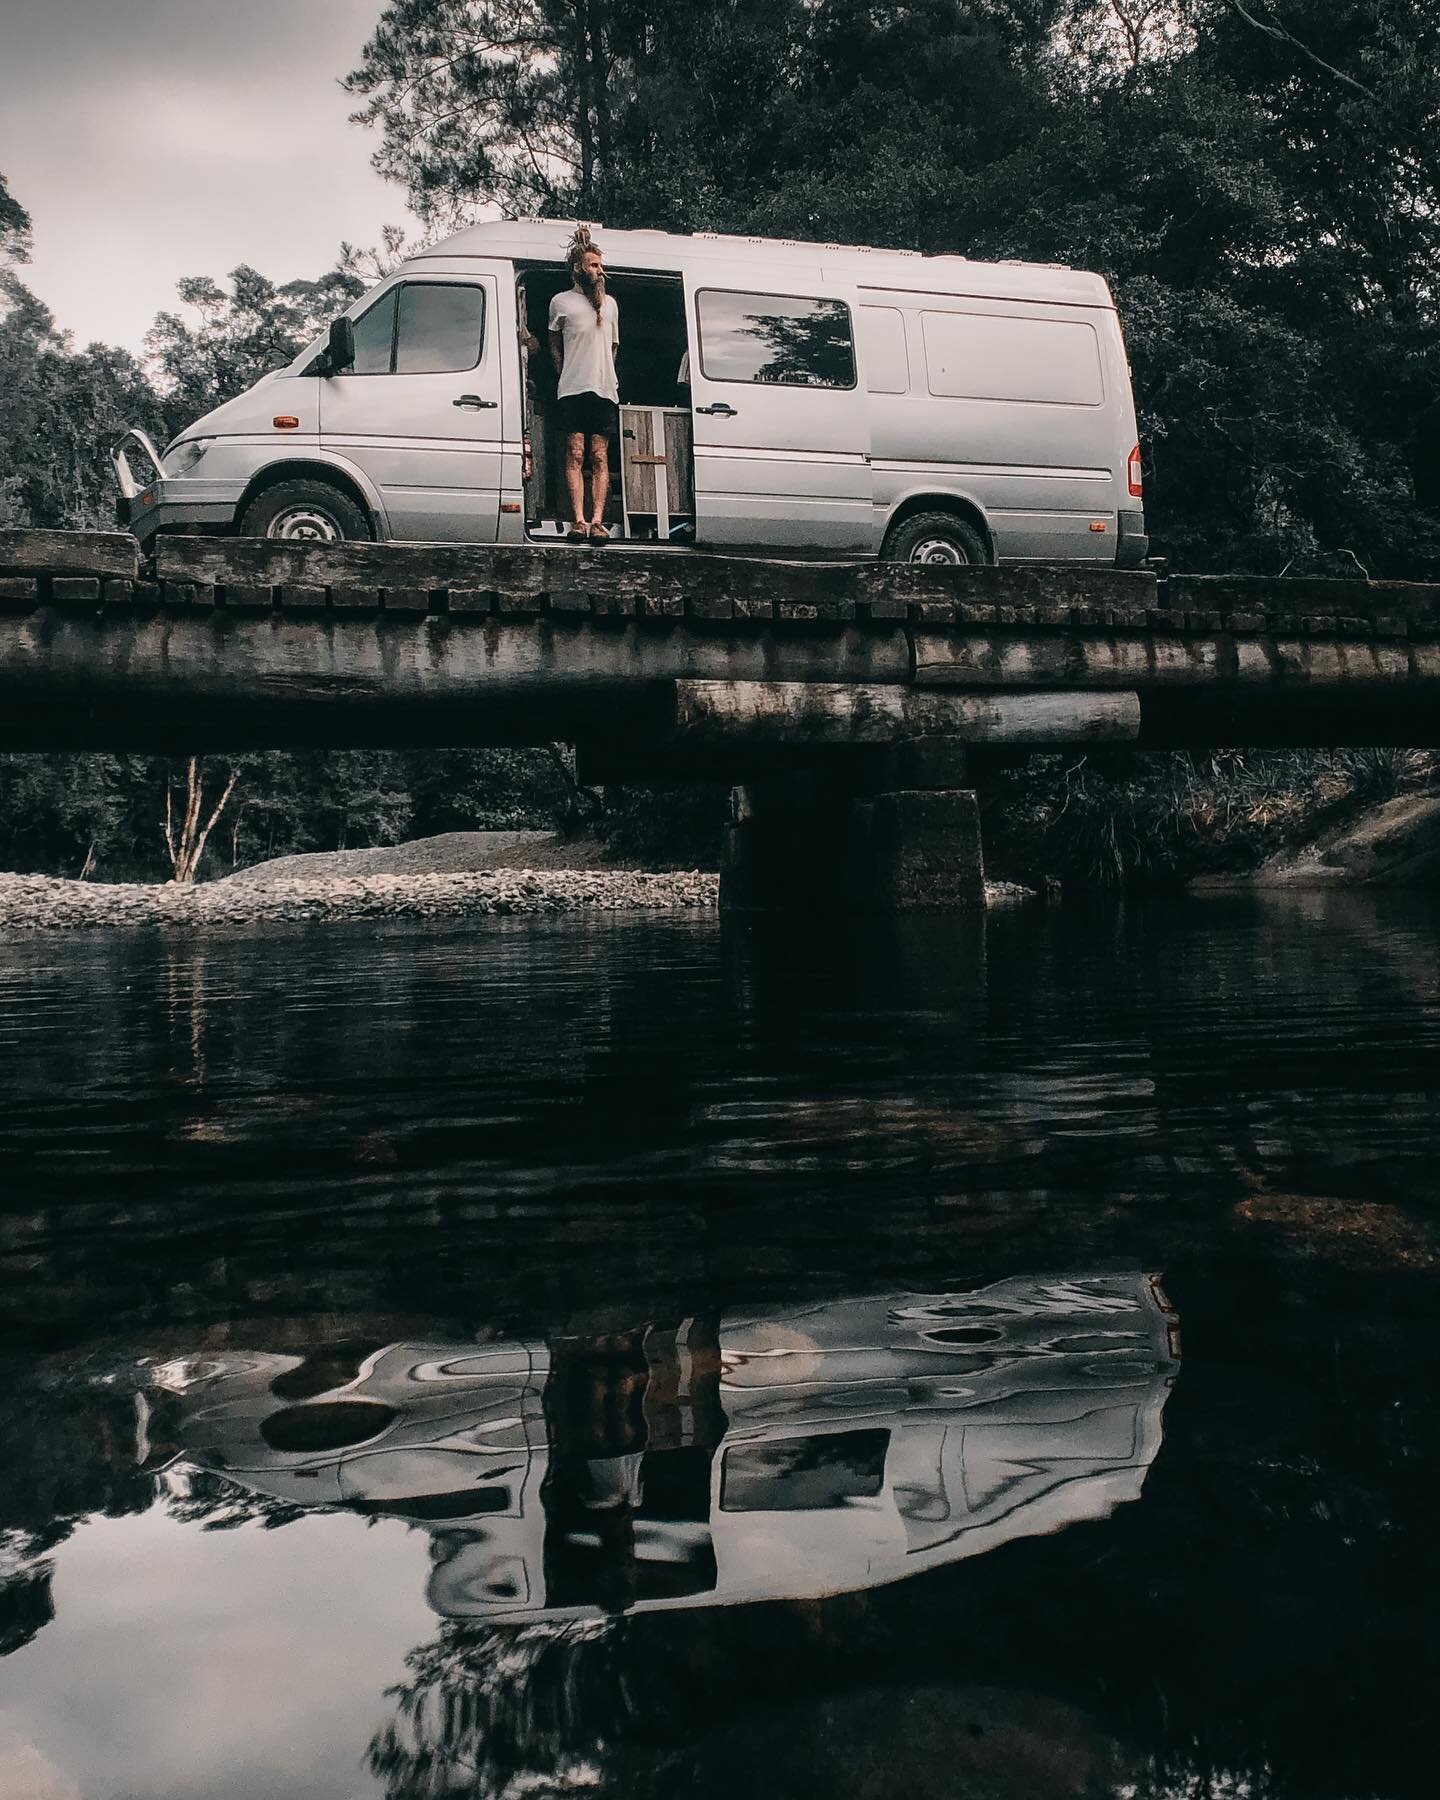 Sunrise swims, beautiful locations, and the heartsinking rattle of CV joints. The highs and lows of vanlife.